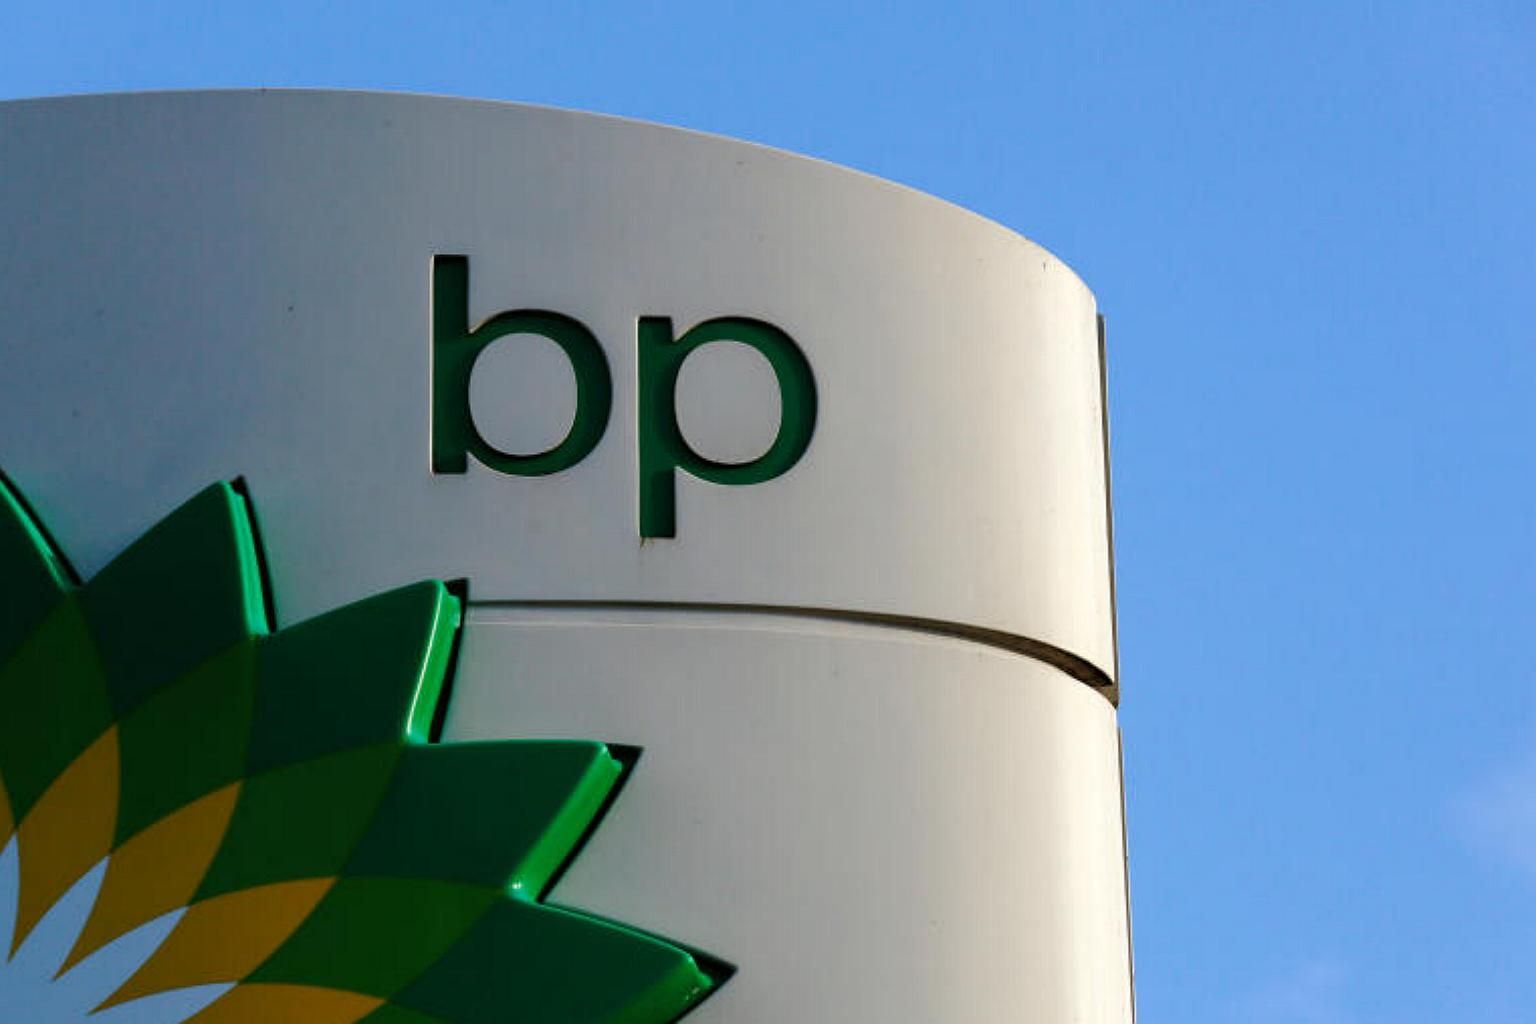 BP returns to solar power buys 43% stake in Lightsource